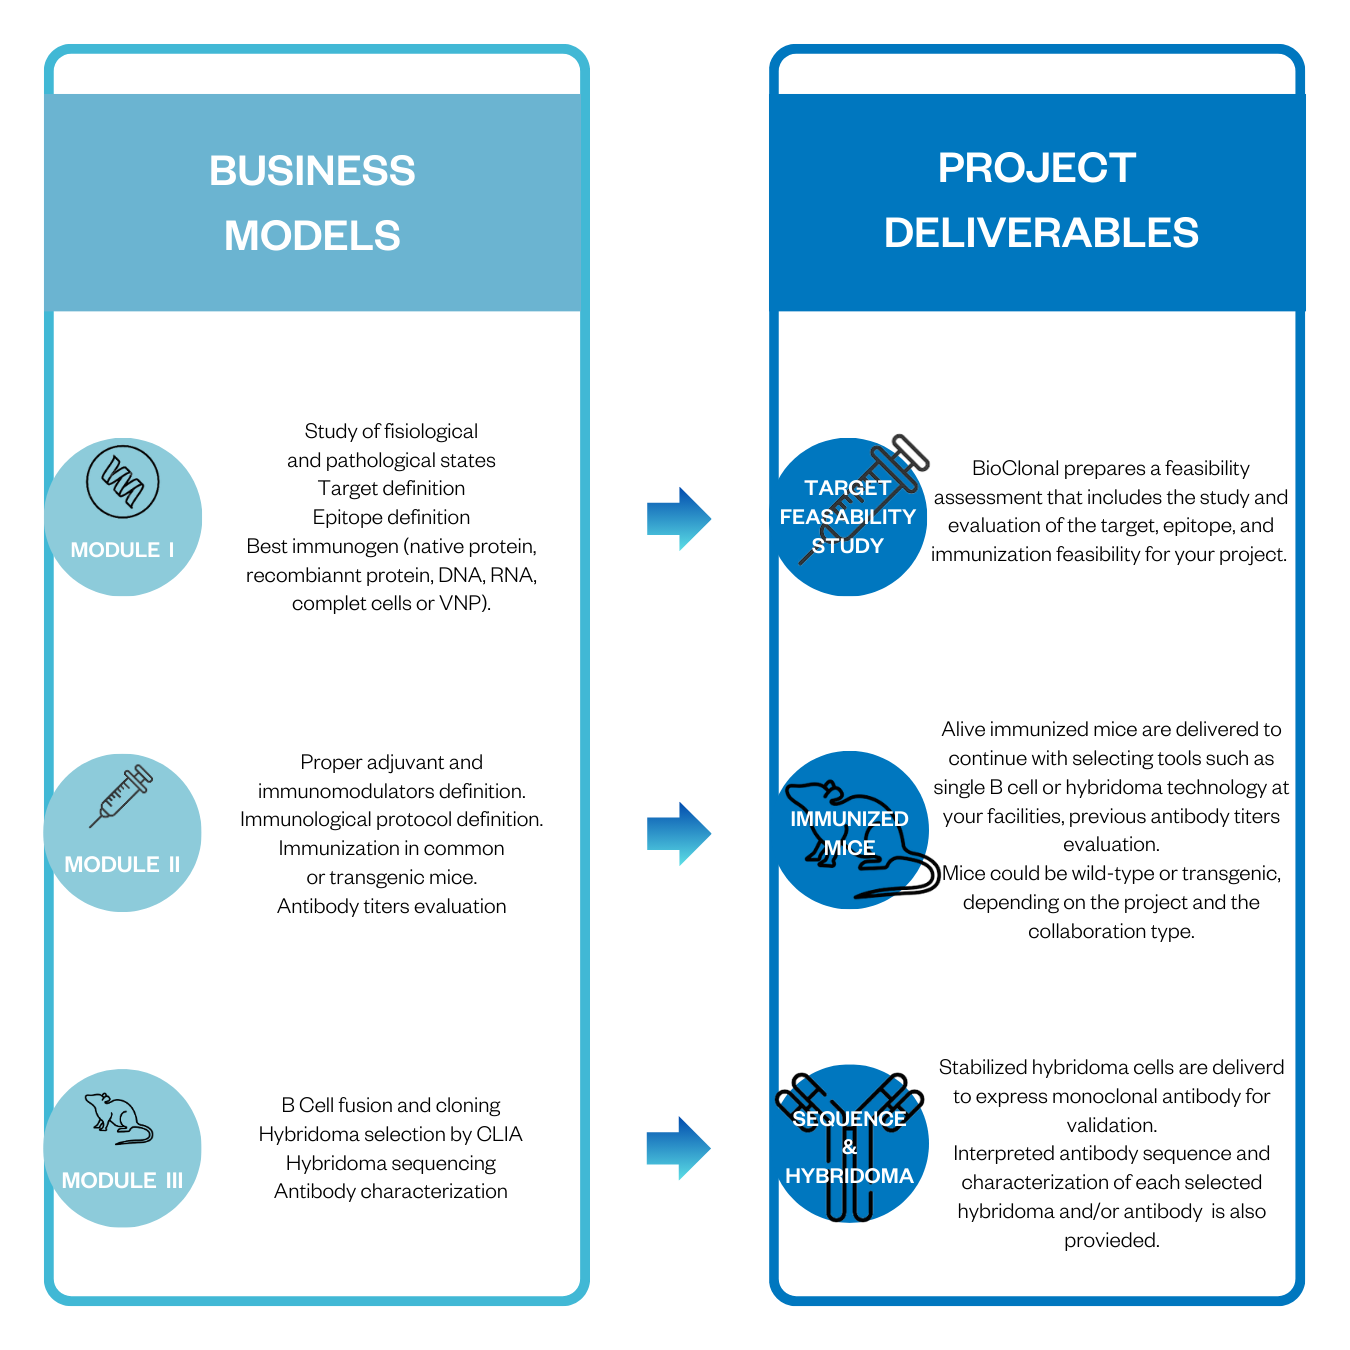 BioClonal Business Model and Project Deliverables